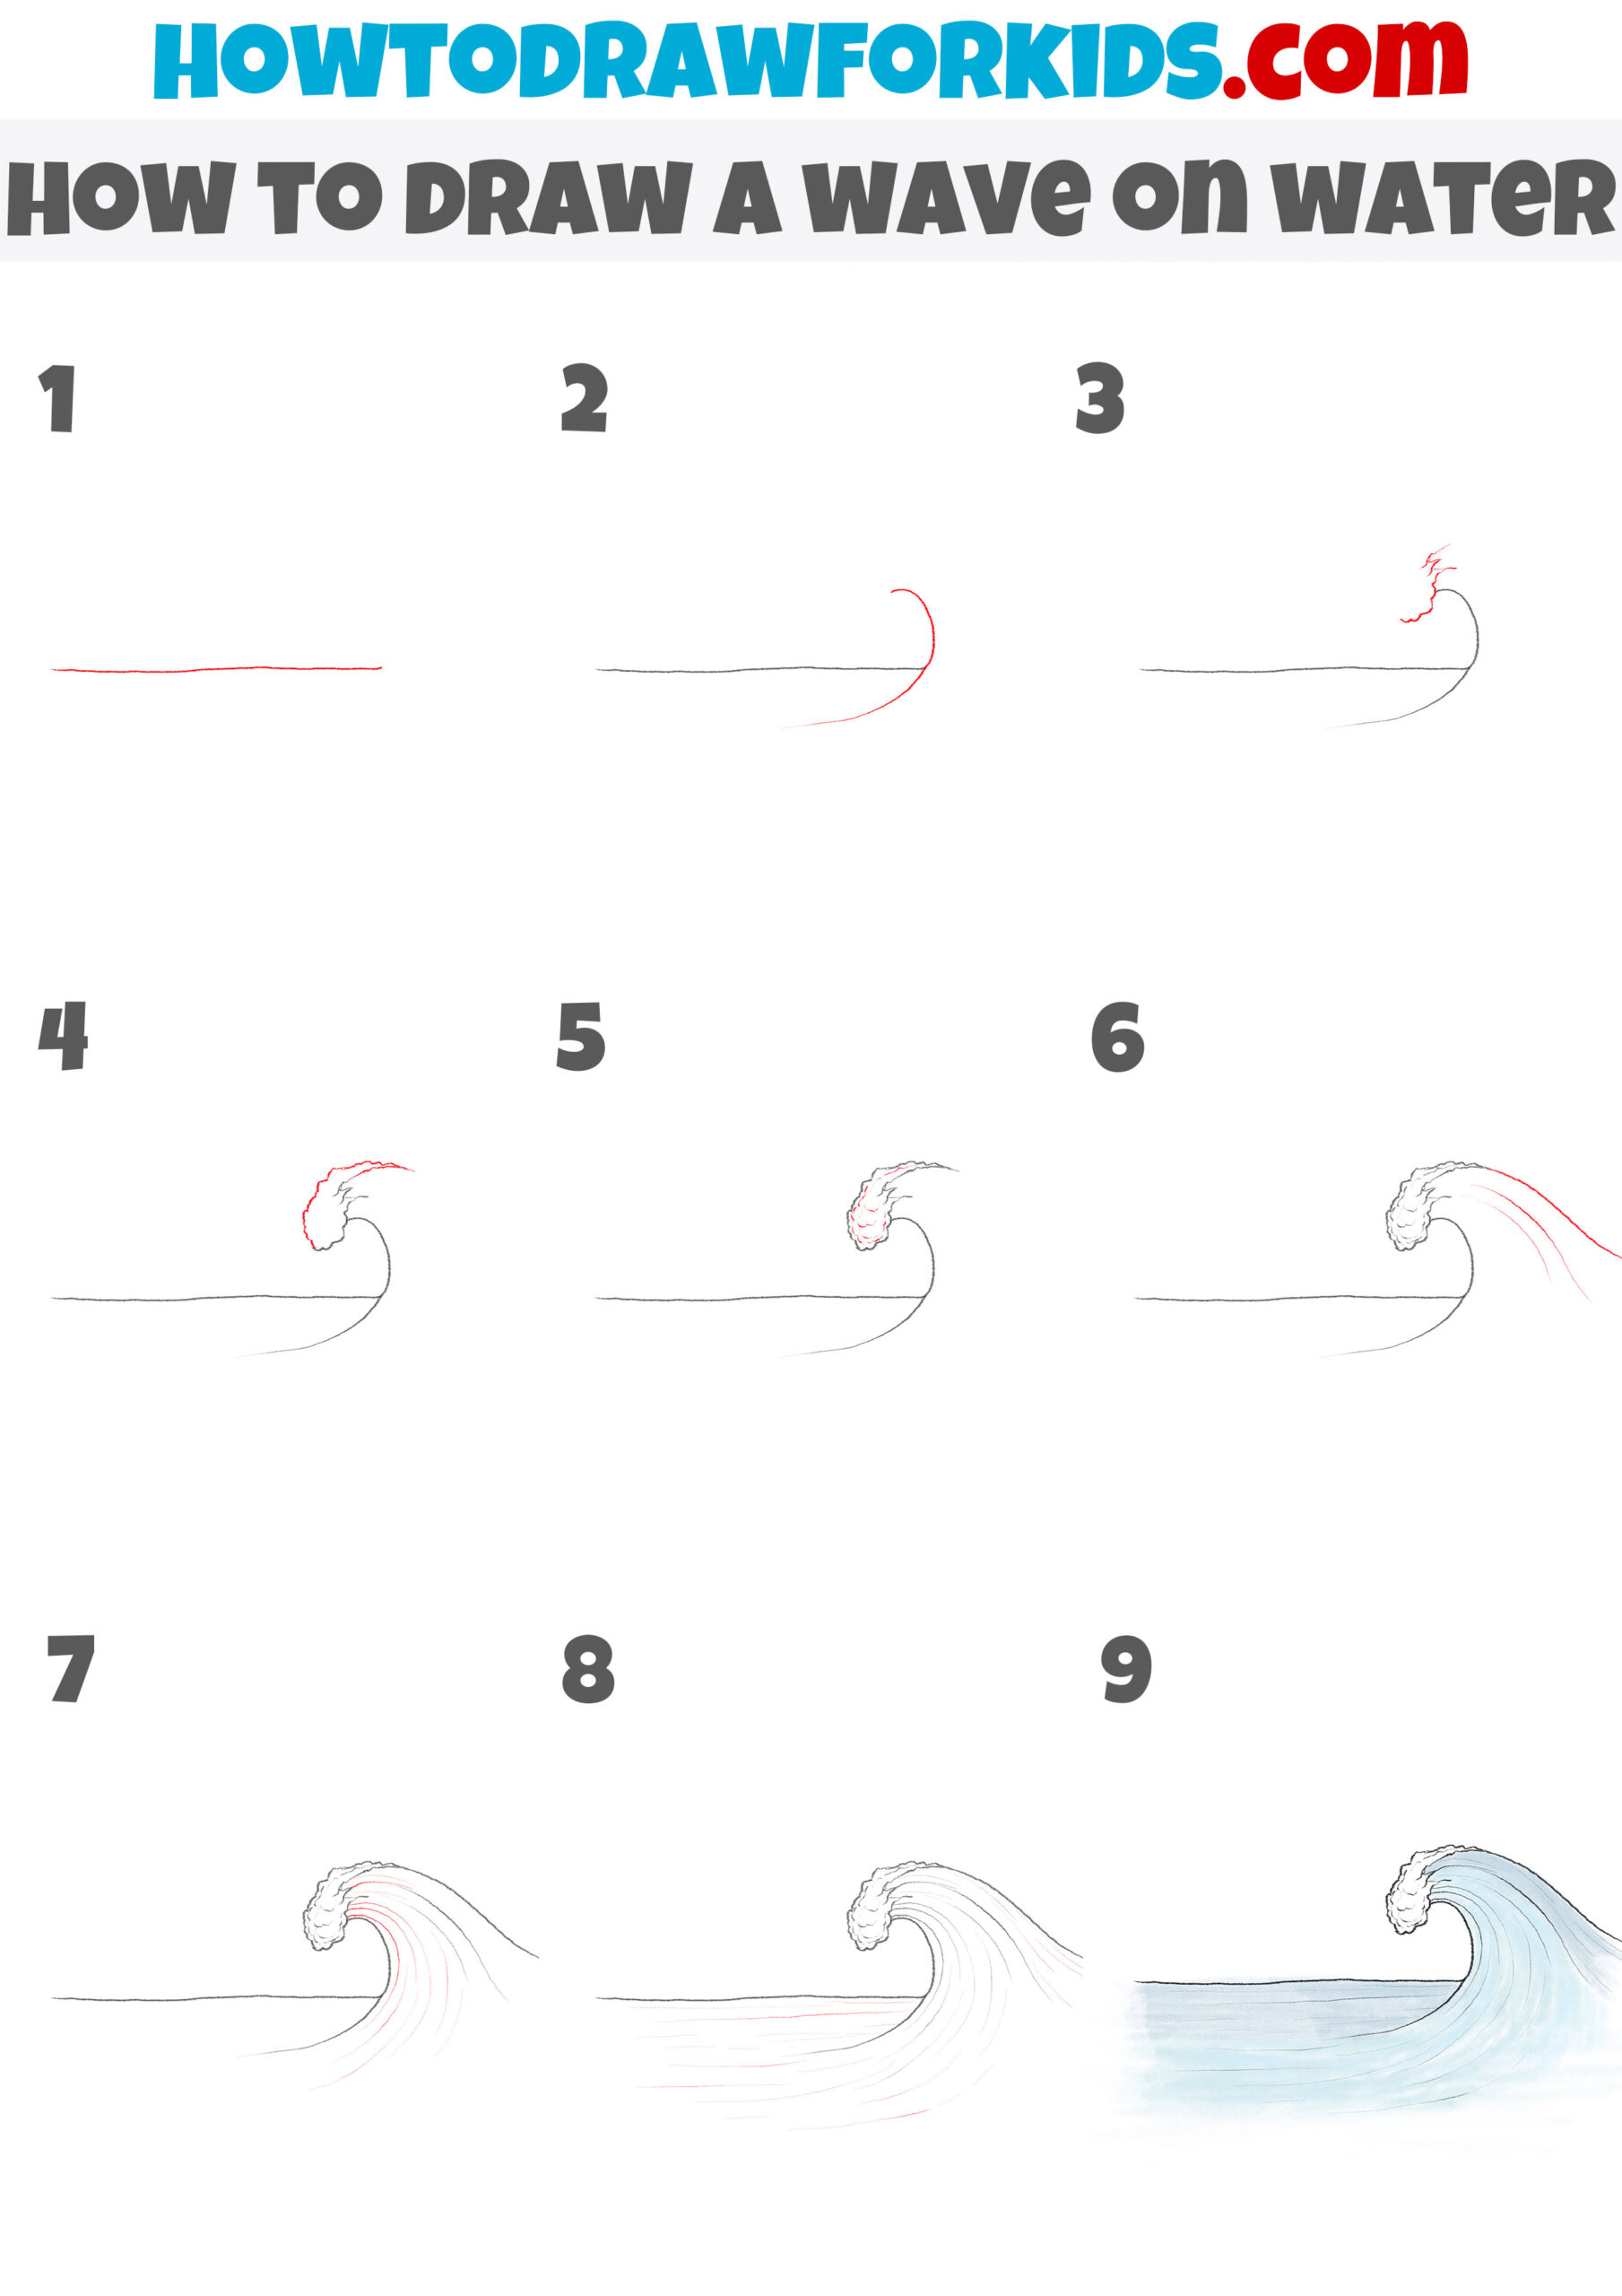 how to draw a wave on water step by step